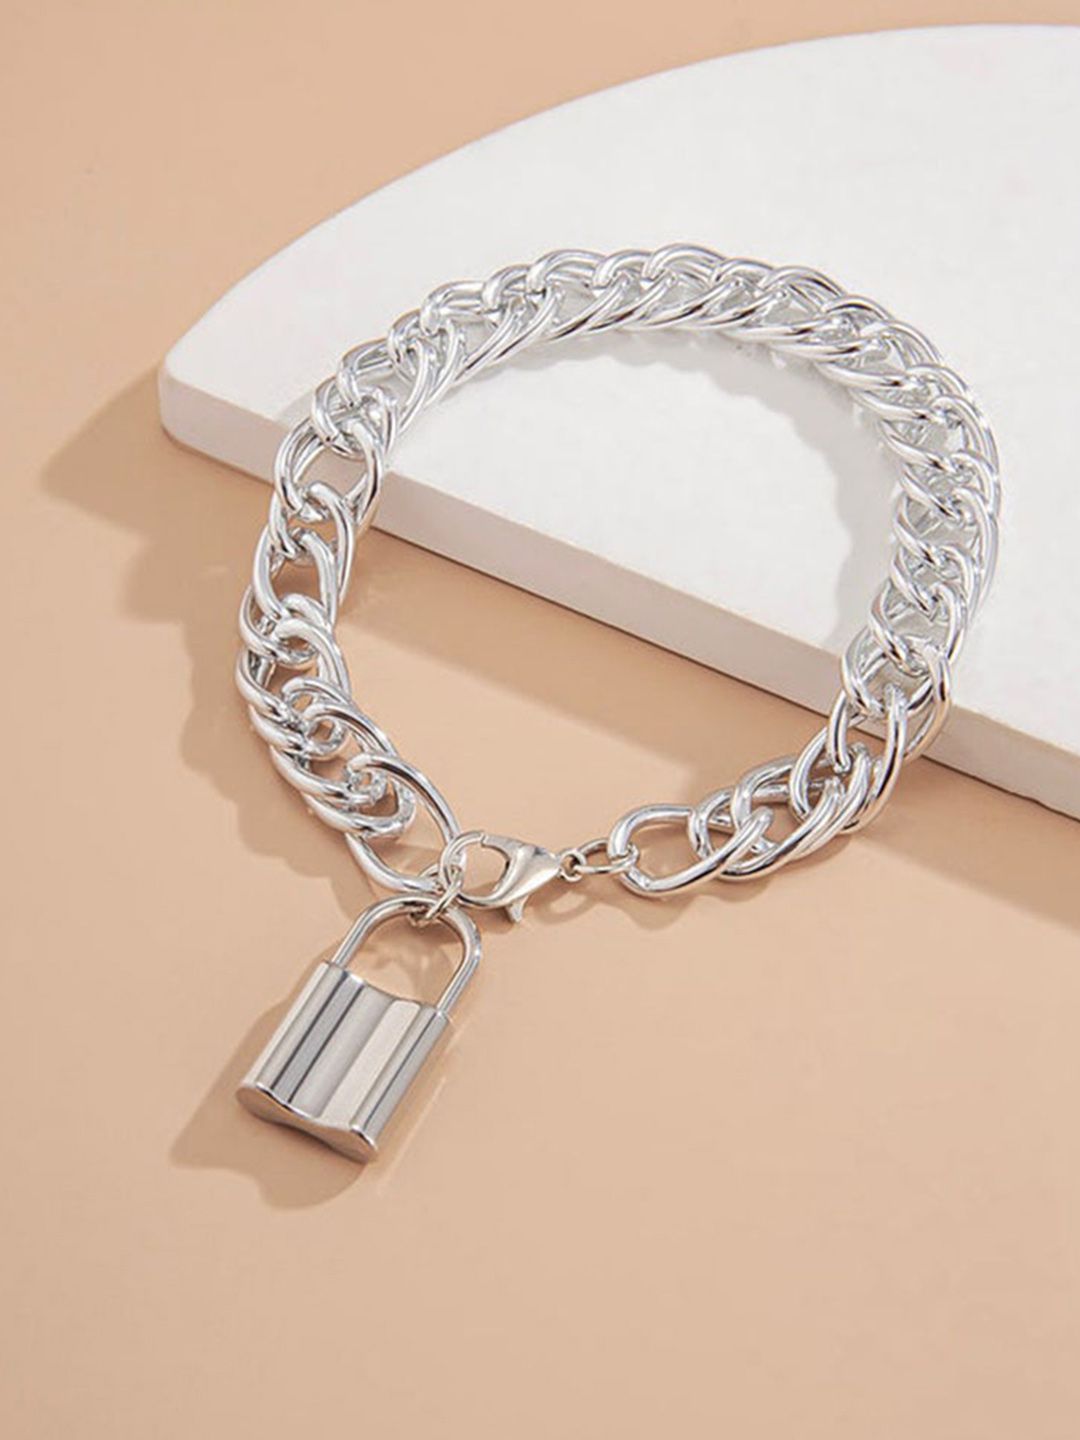 URBANIC Women Silver-Toned Link Bracelet with Lock Detail Price in India